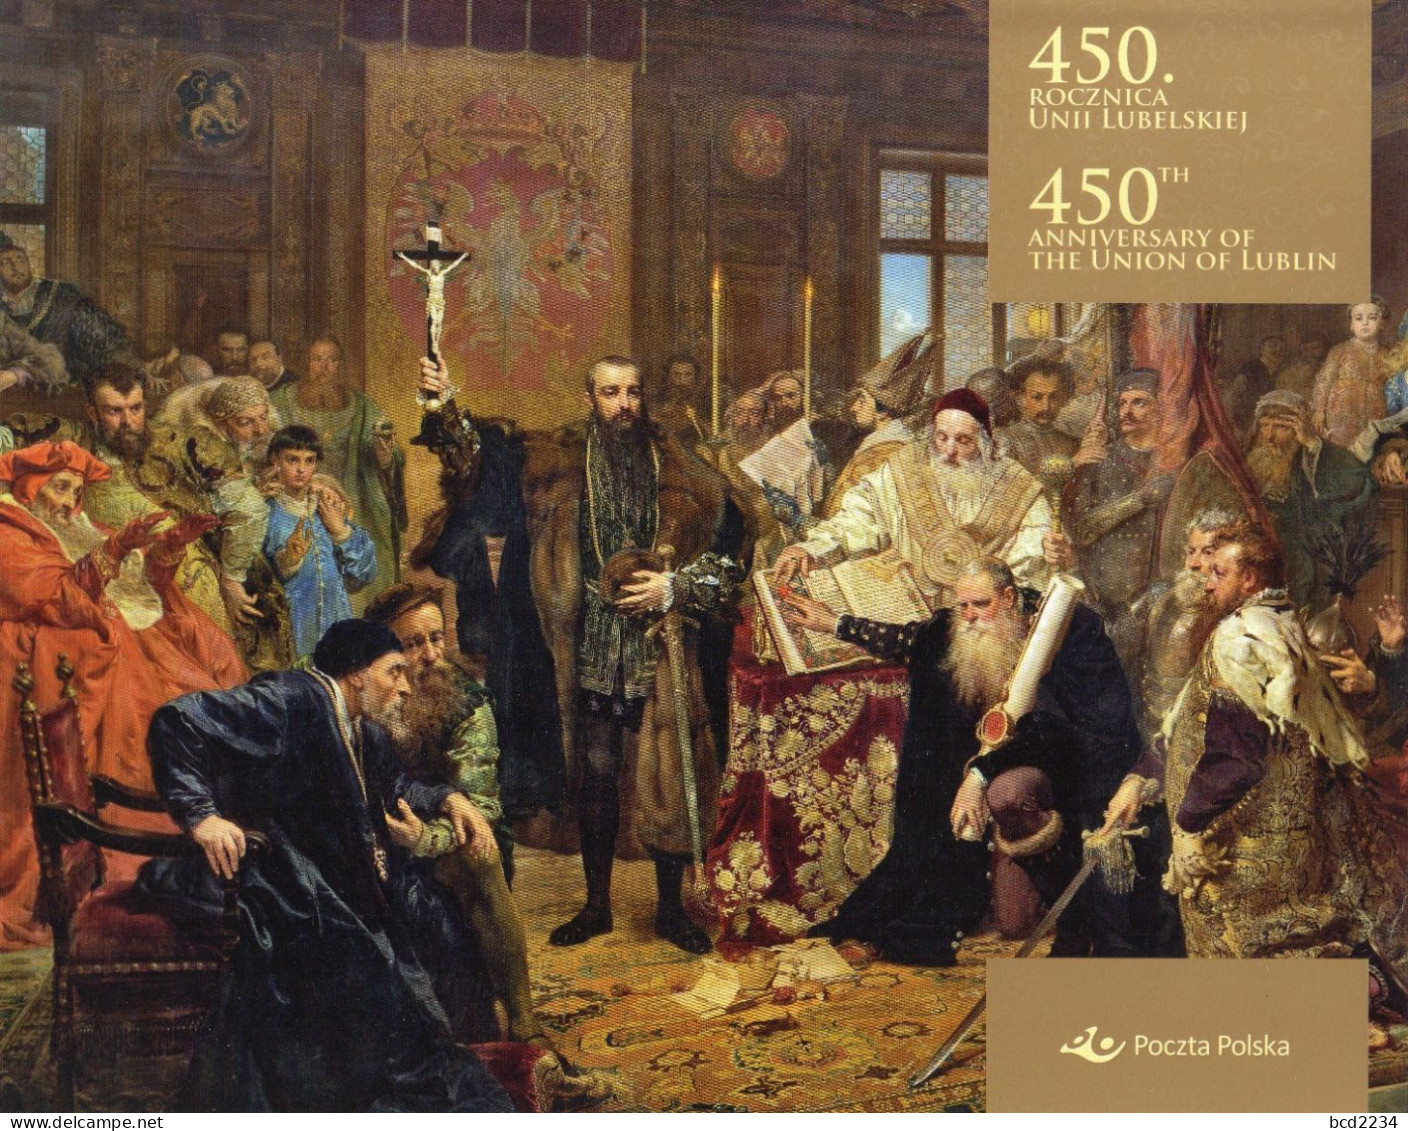 POLAND 2019 POLISH POST OFFICE LIMITED EDITION FOLDER: 450TH ANNIVERSARY OF UNION OF LUBLIN MS LITHUANIA KINGS ROYALS - Lettres & Documents